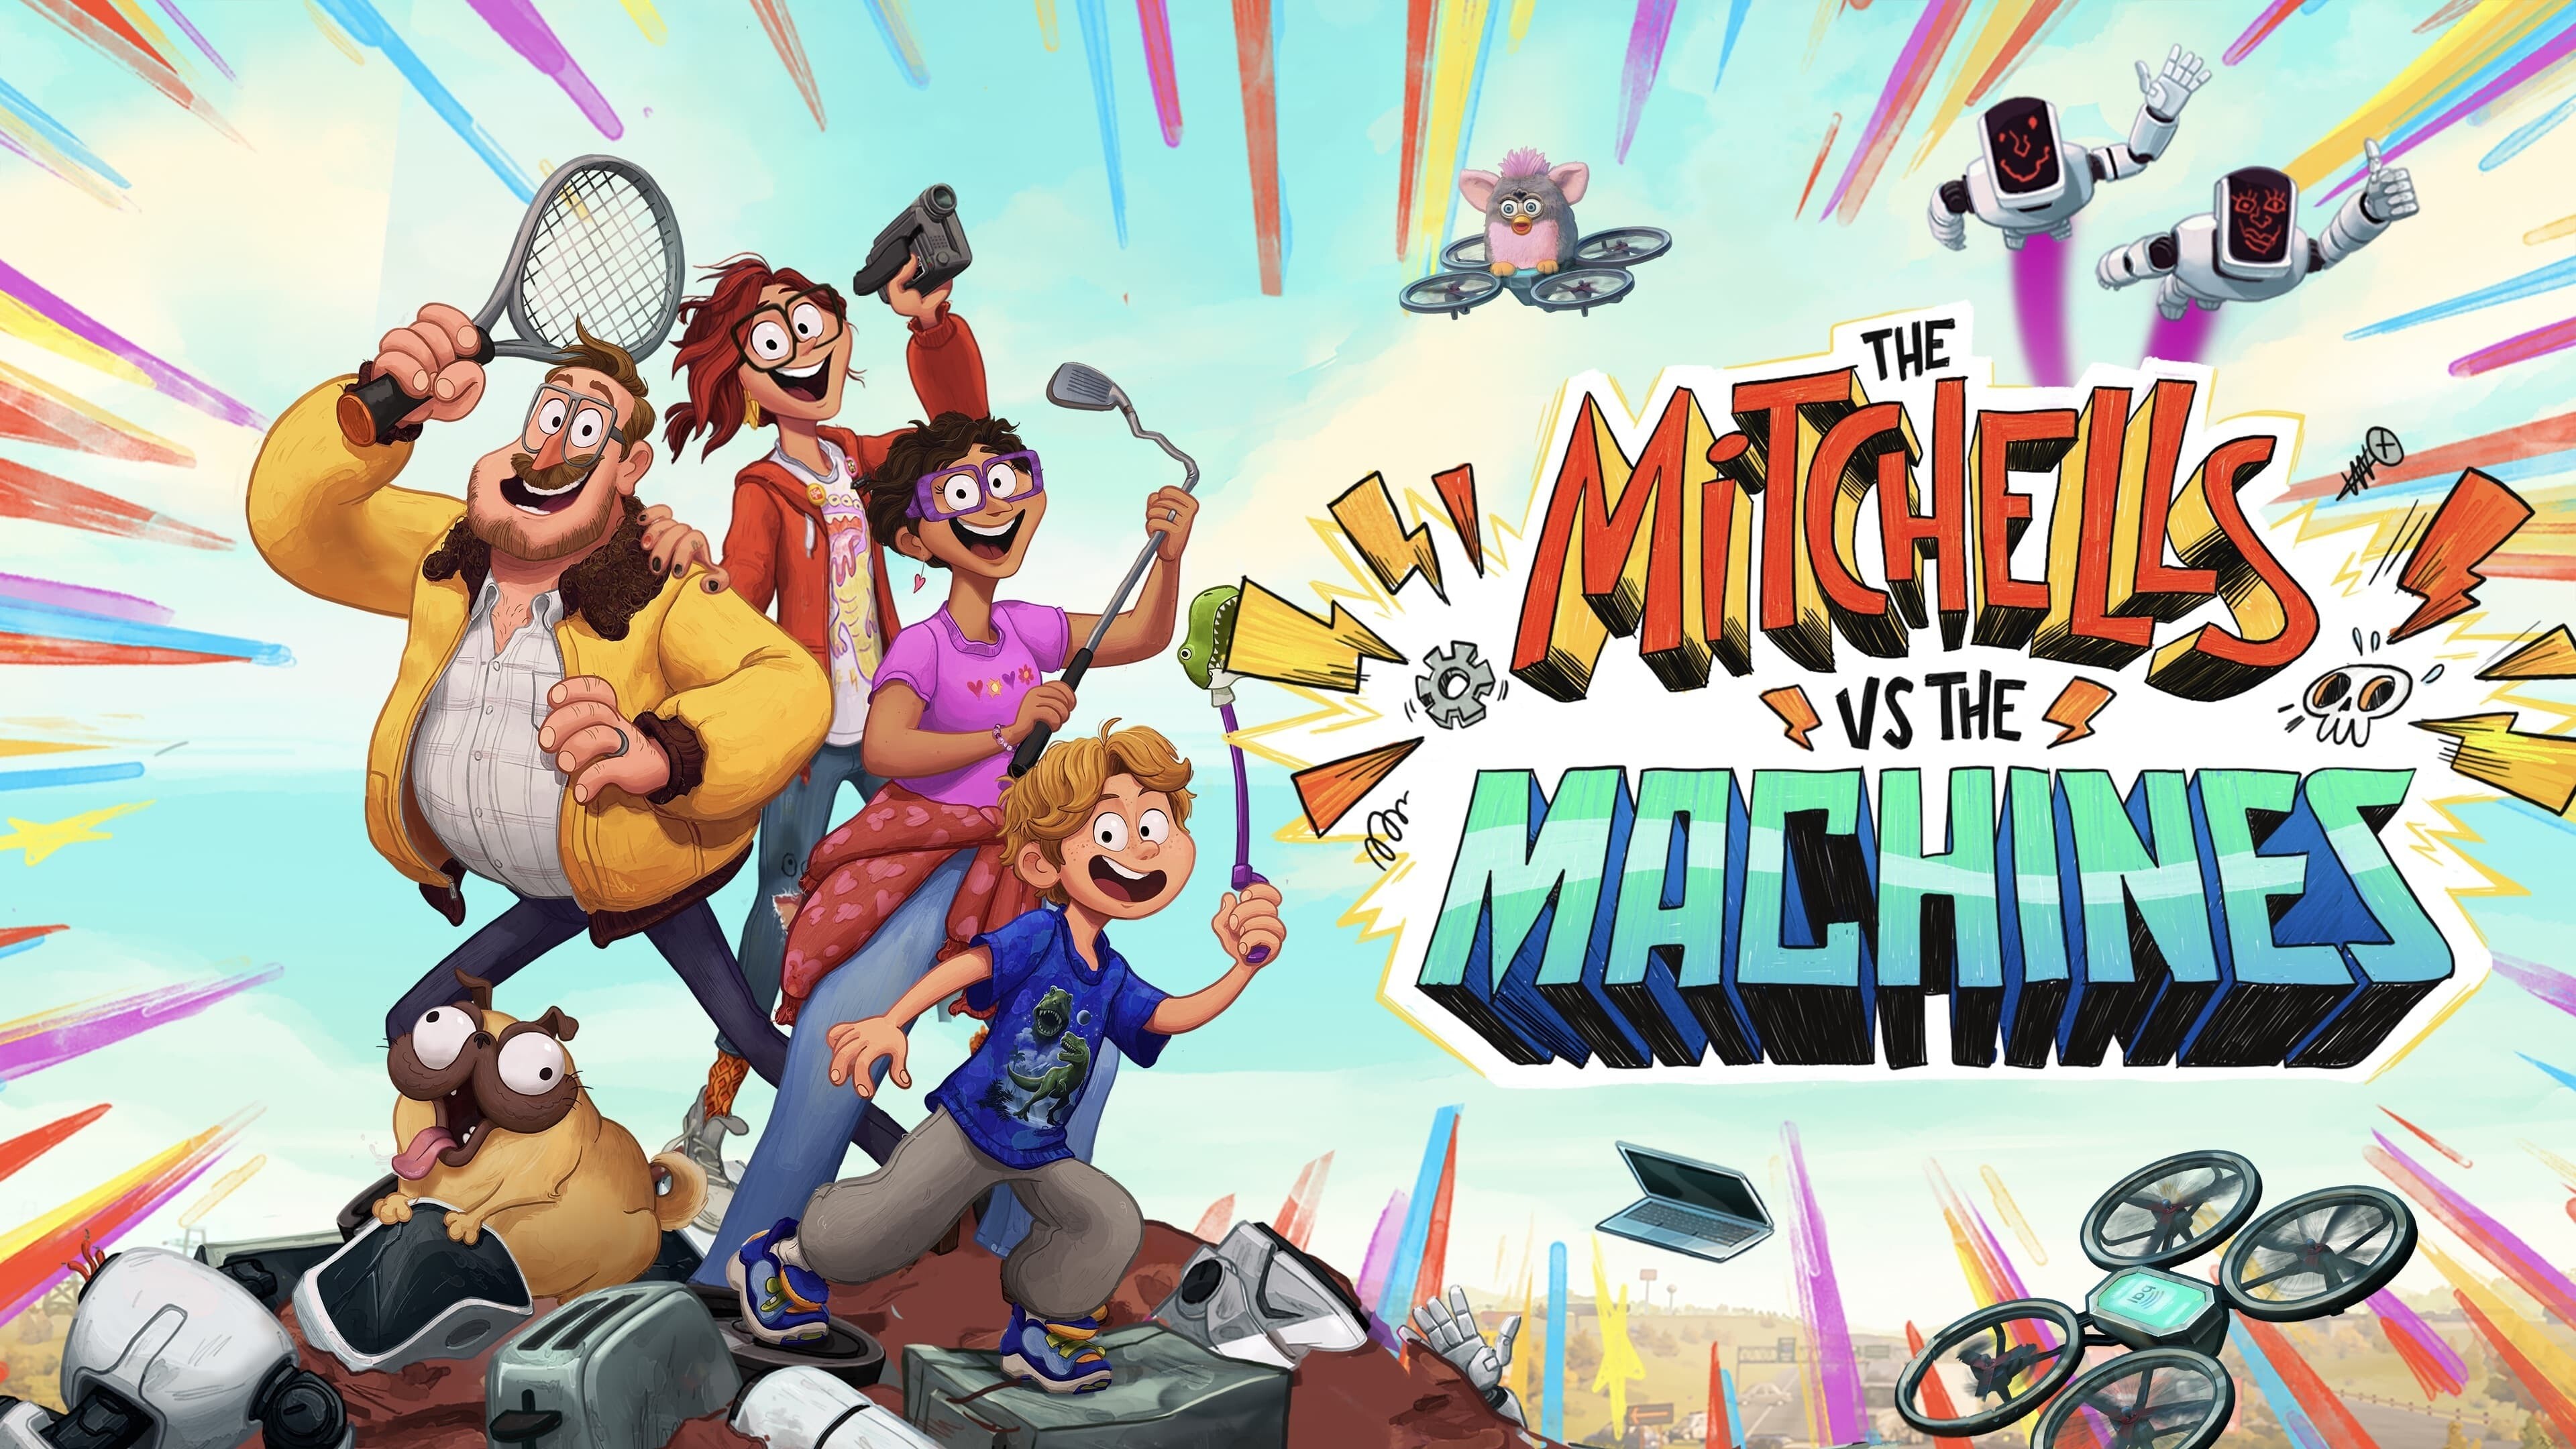 The Mitchells vs. the Machines: The film was directed by Mike Rianda in his feature directorial debut. 3840x2160 4K Wallpaper.